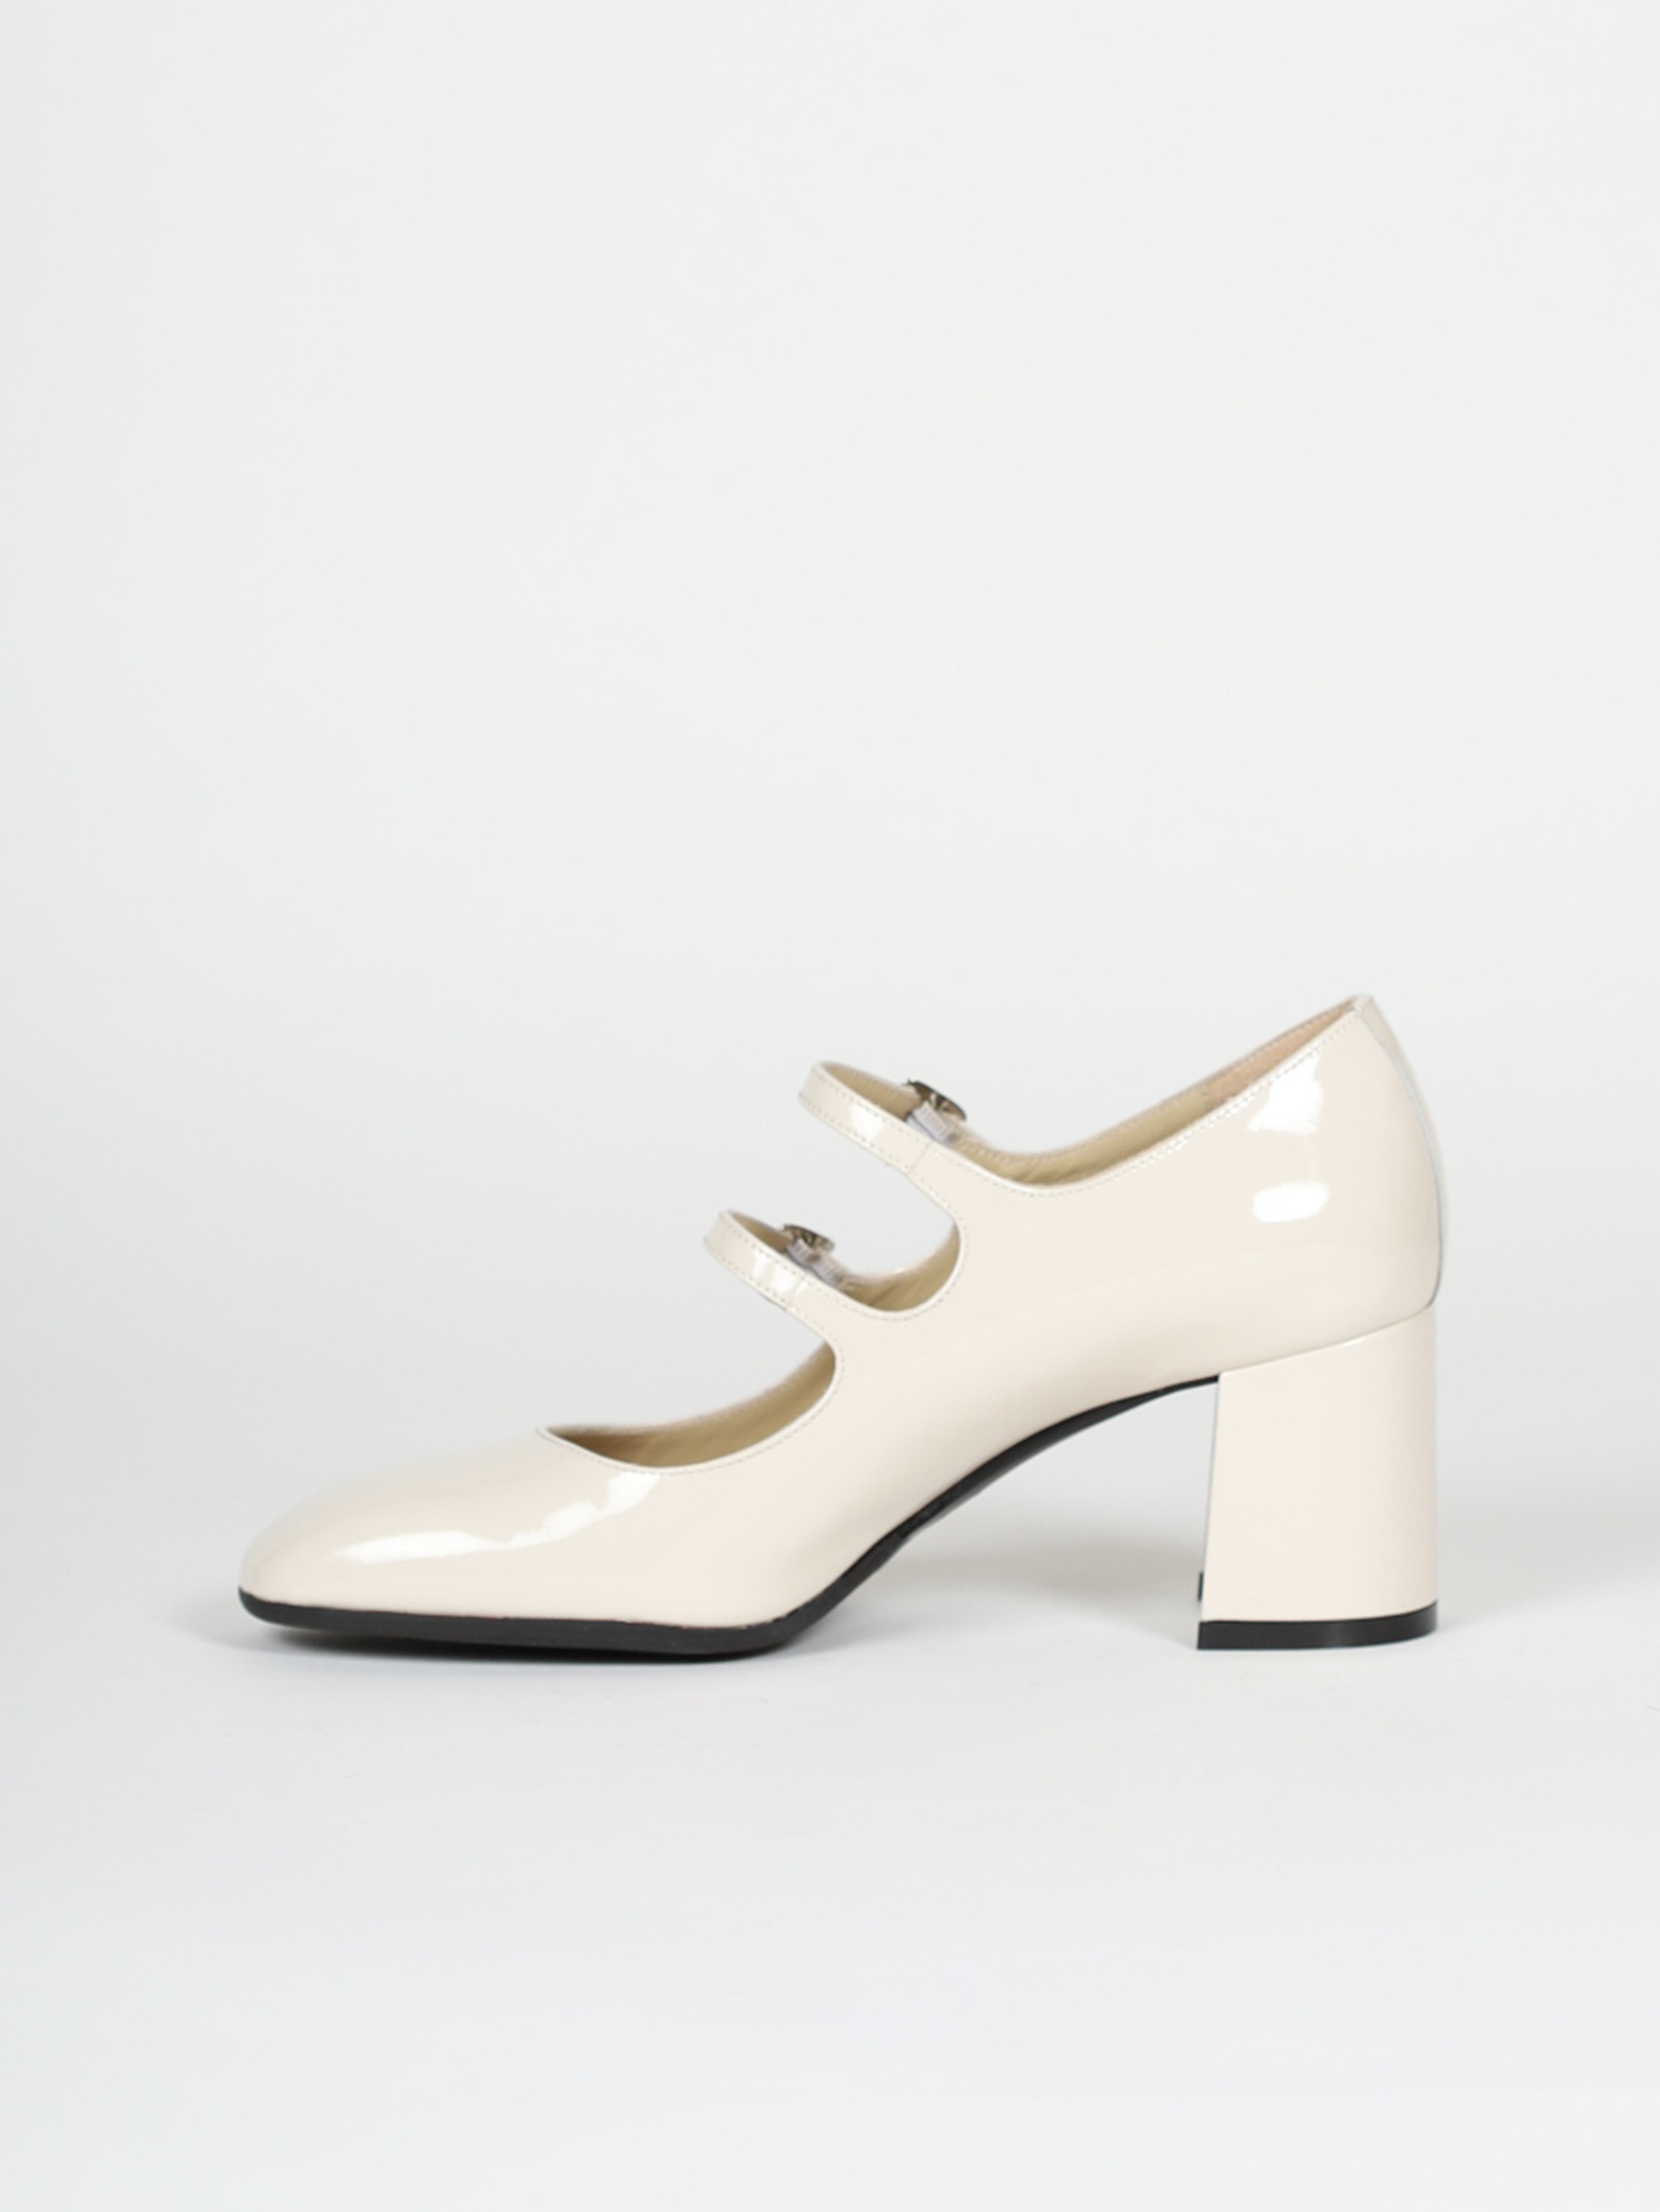 Beige patent leather Mary Janes